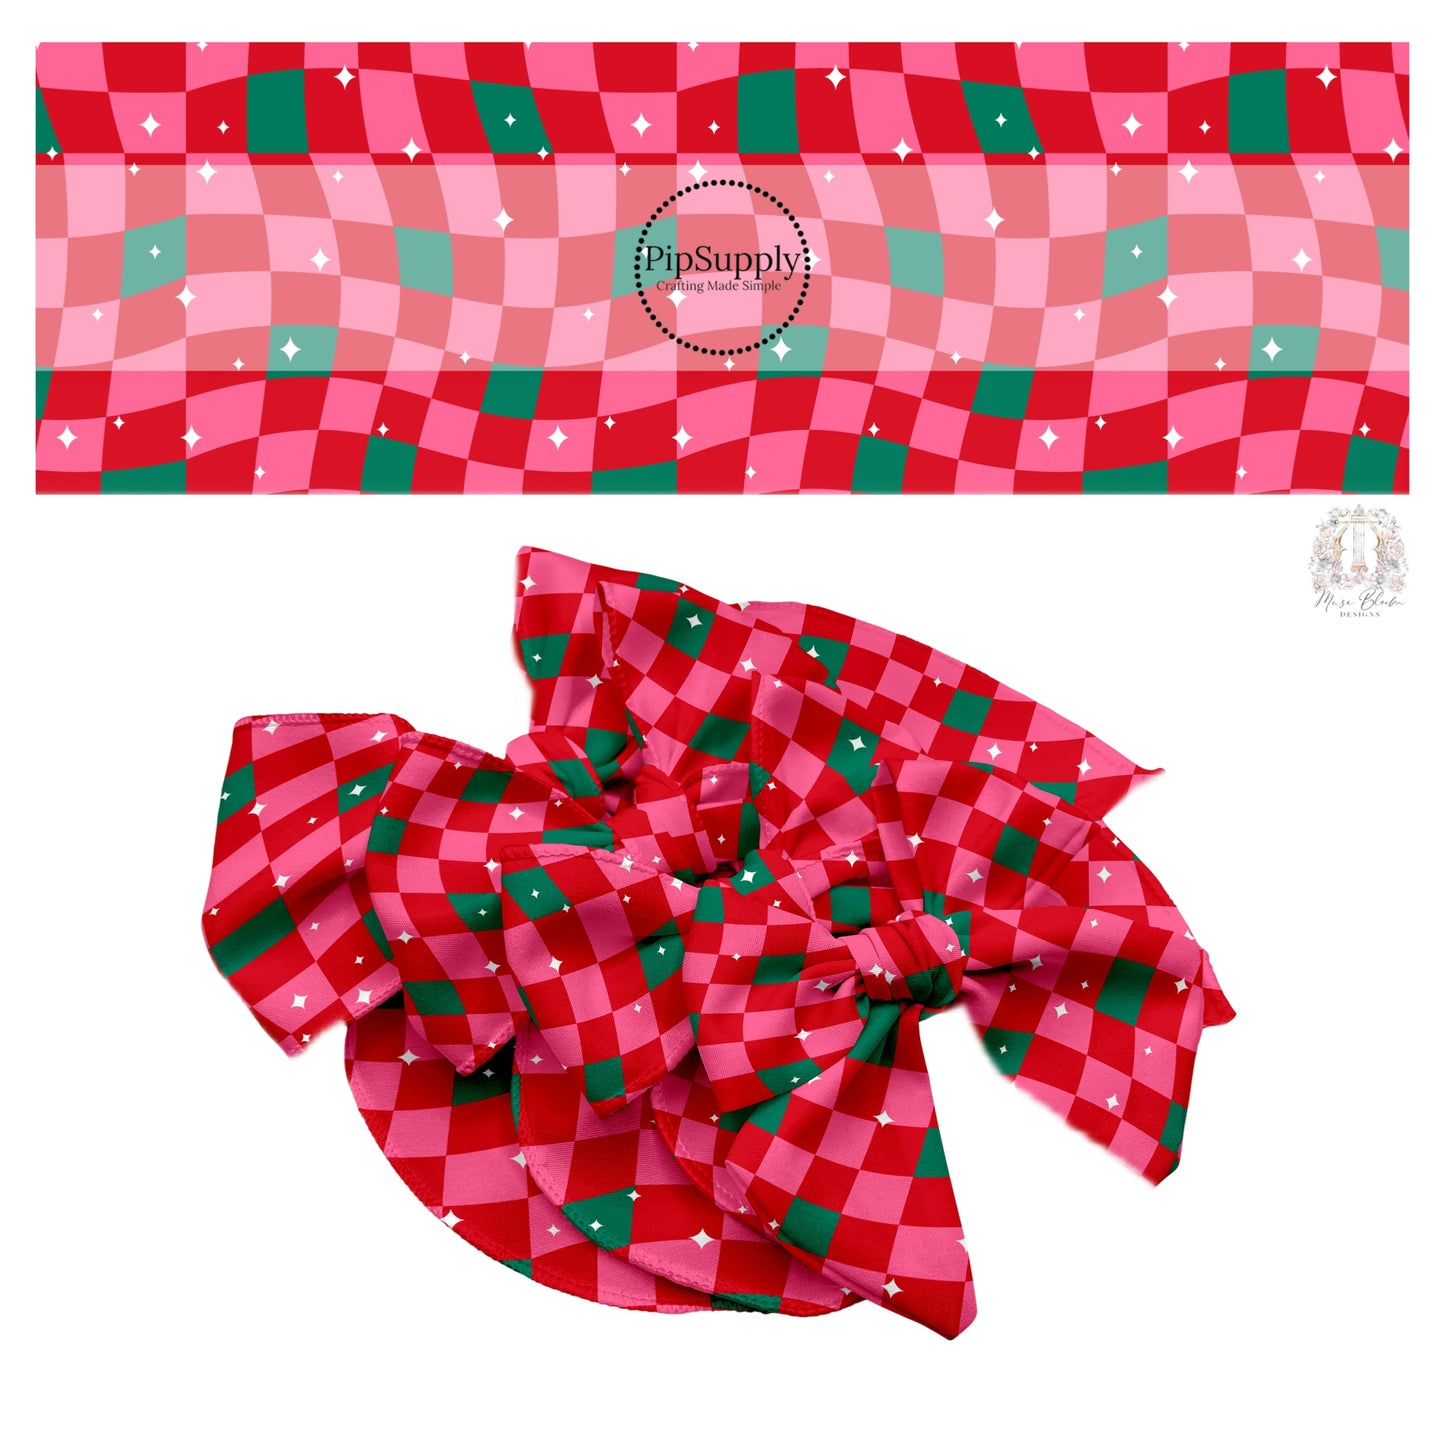 White stars on pink, red, and green checkered hair bow strips